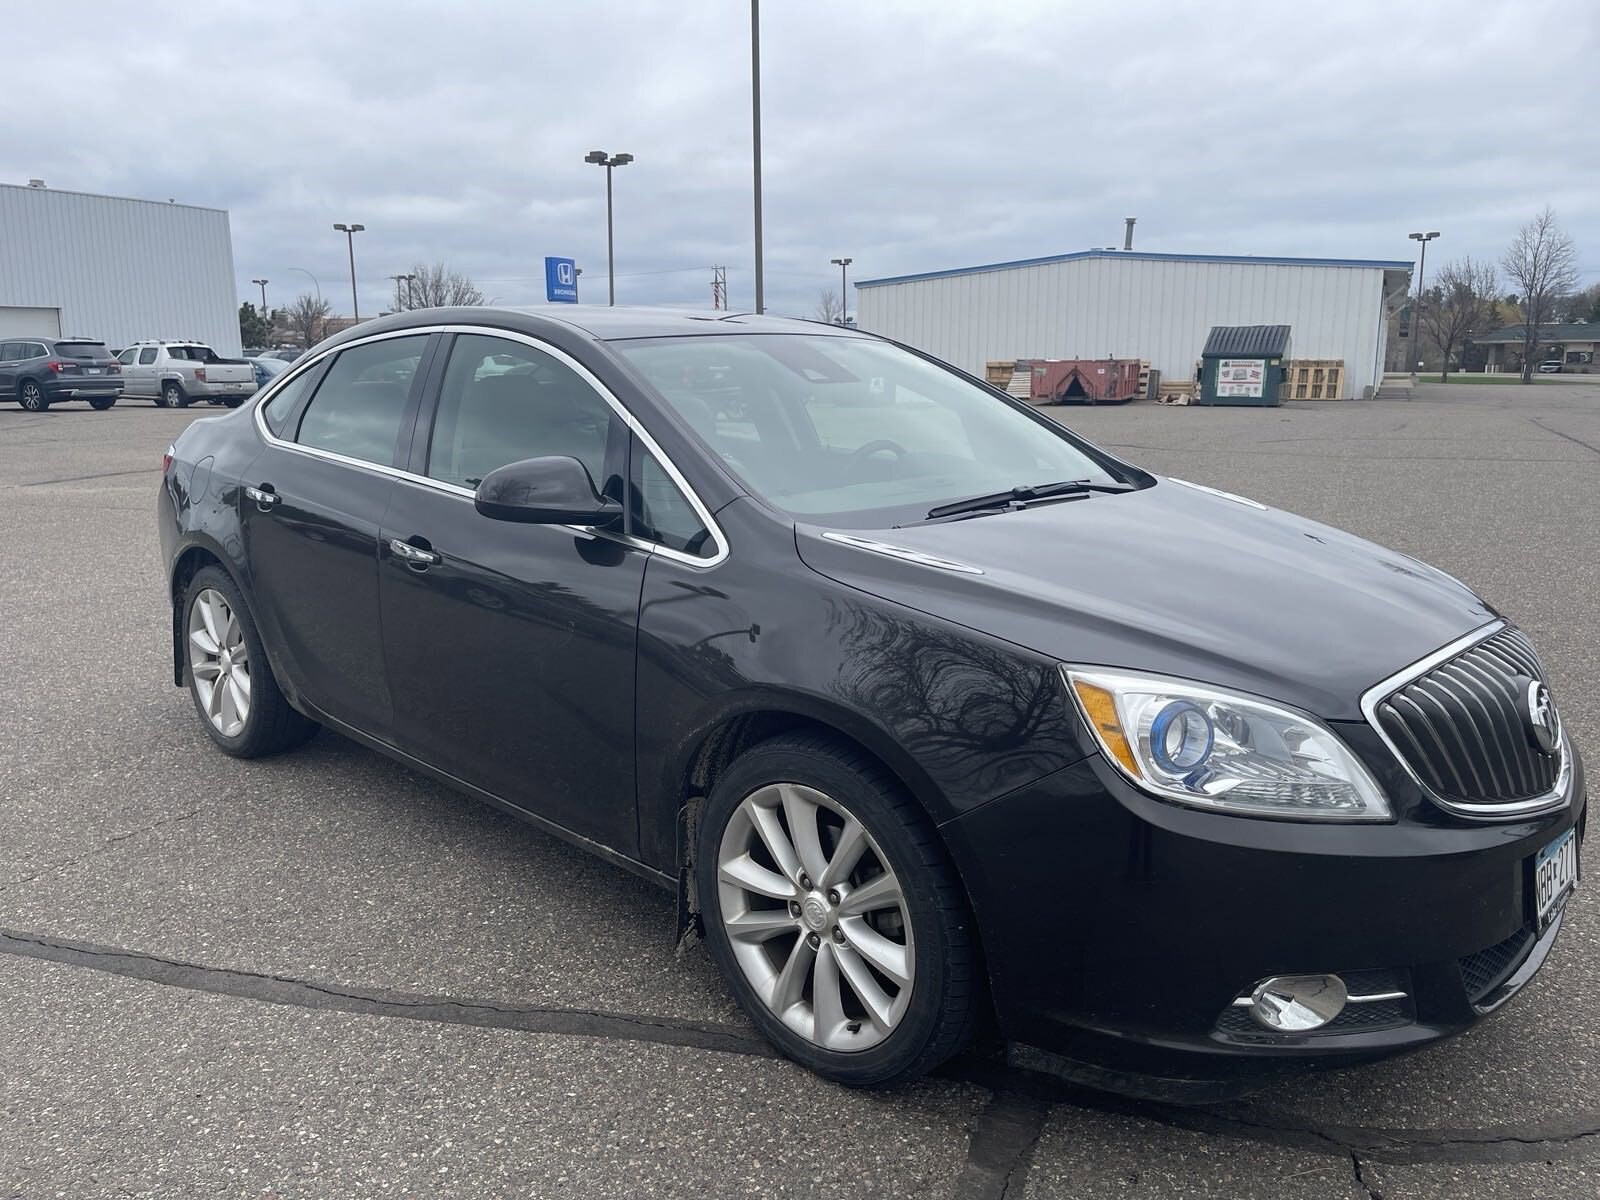 Used 2014 Buick Verano 1SG with VIN 1G4PR5SK7E4210879 for sale in Baxter, Minnesota